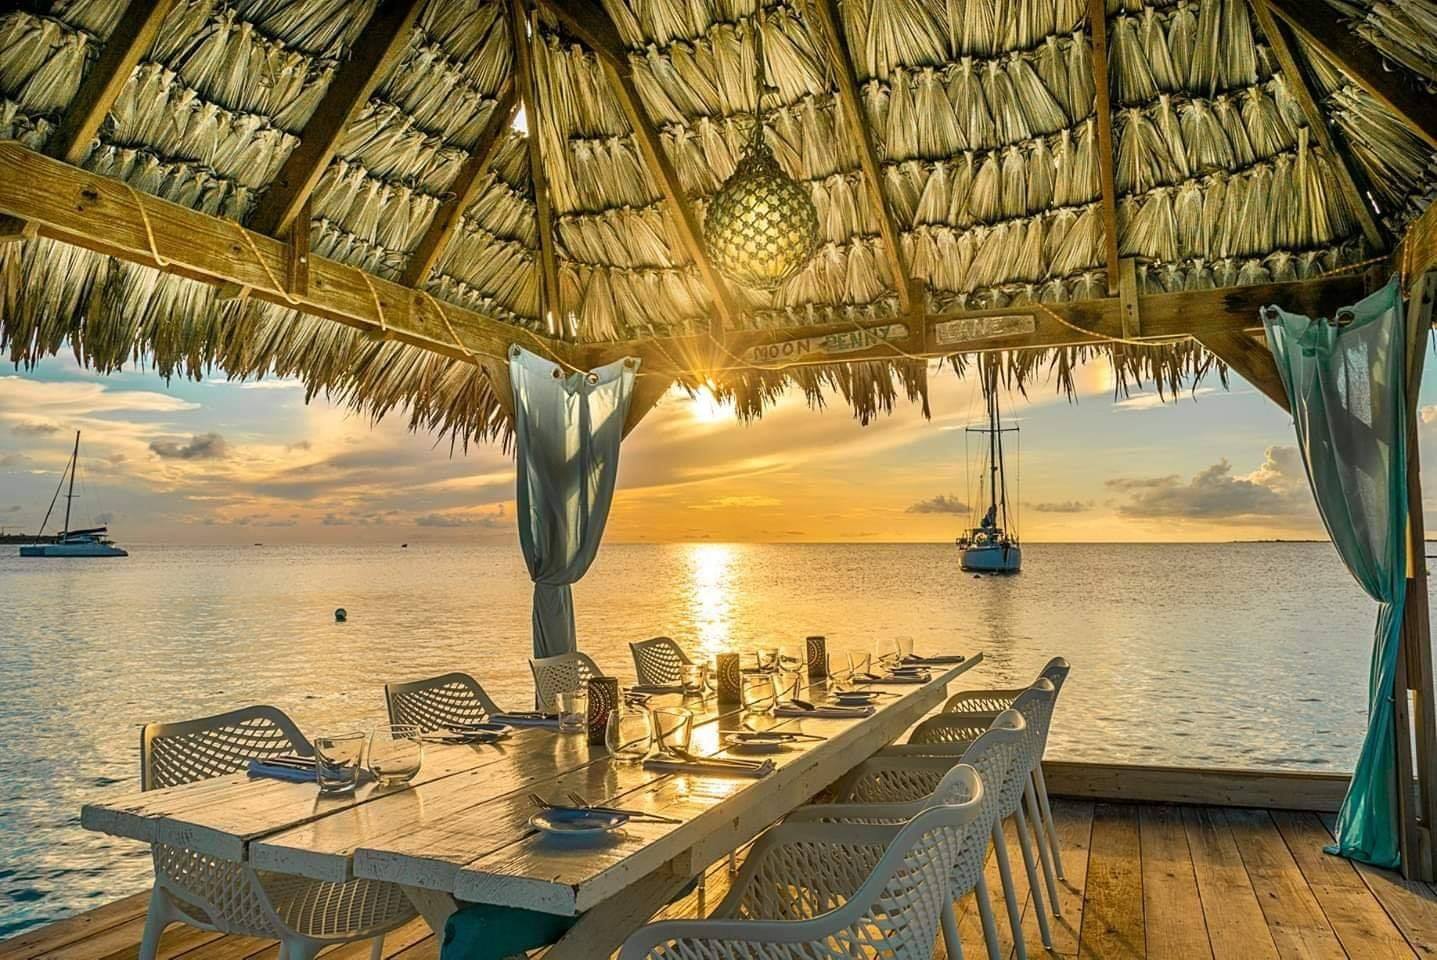 Where to Eat in Bonaire